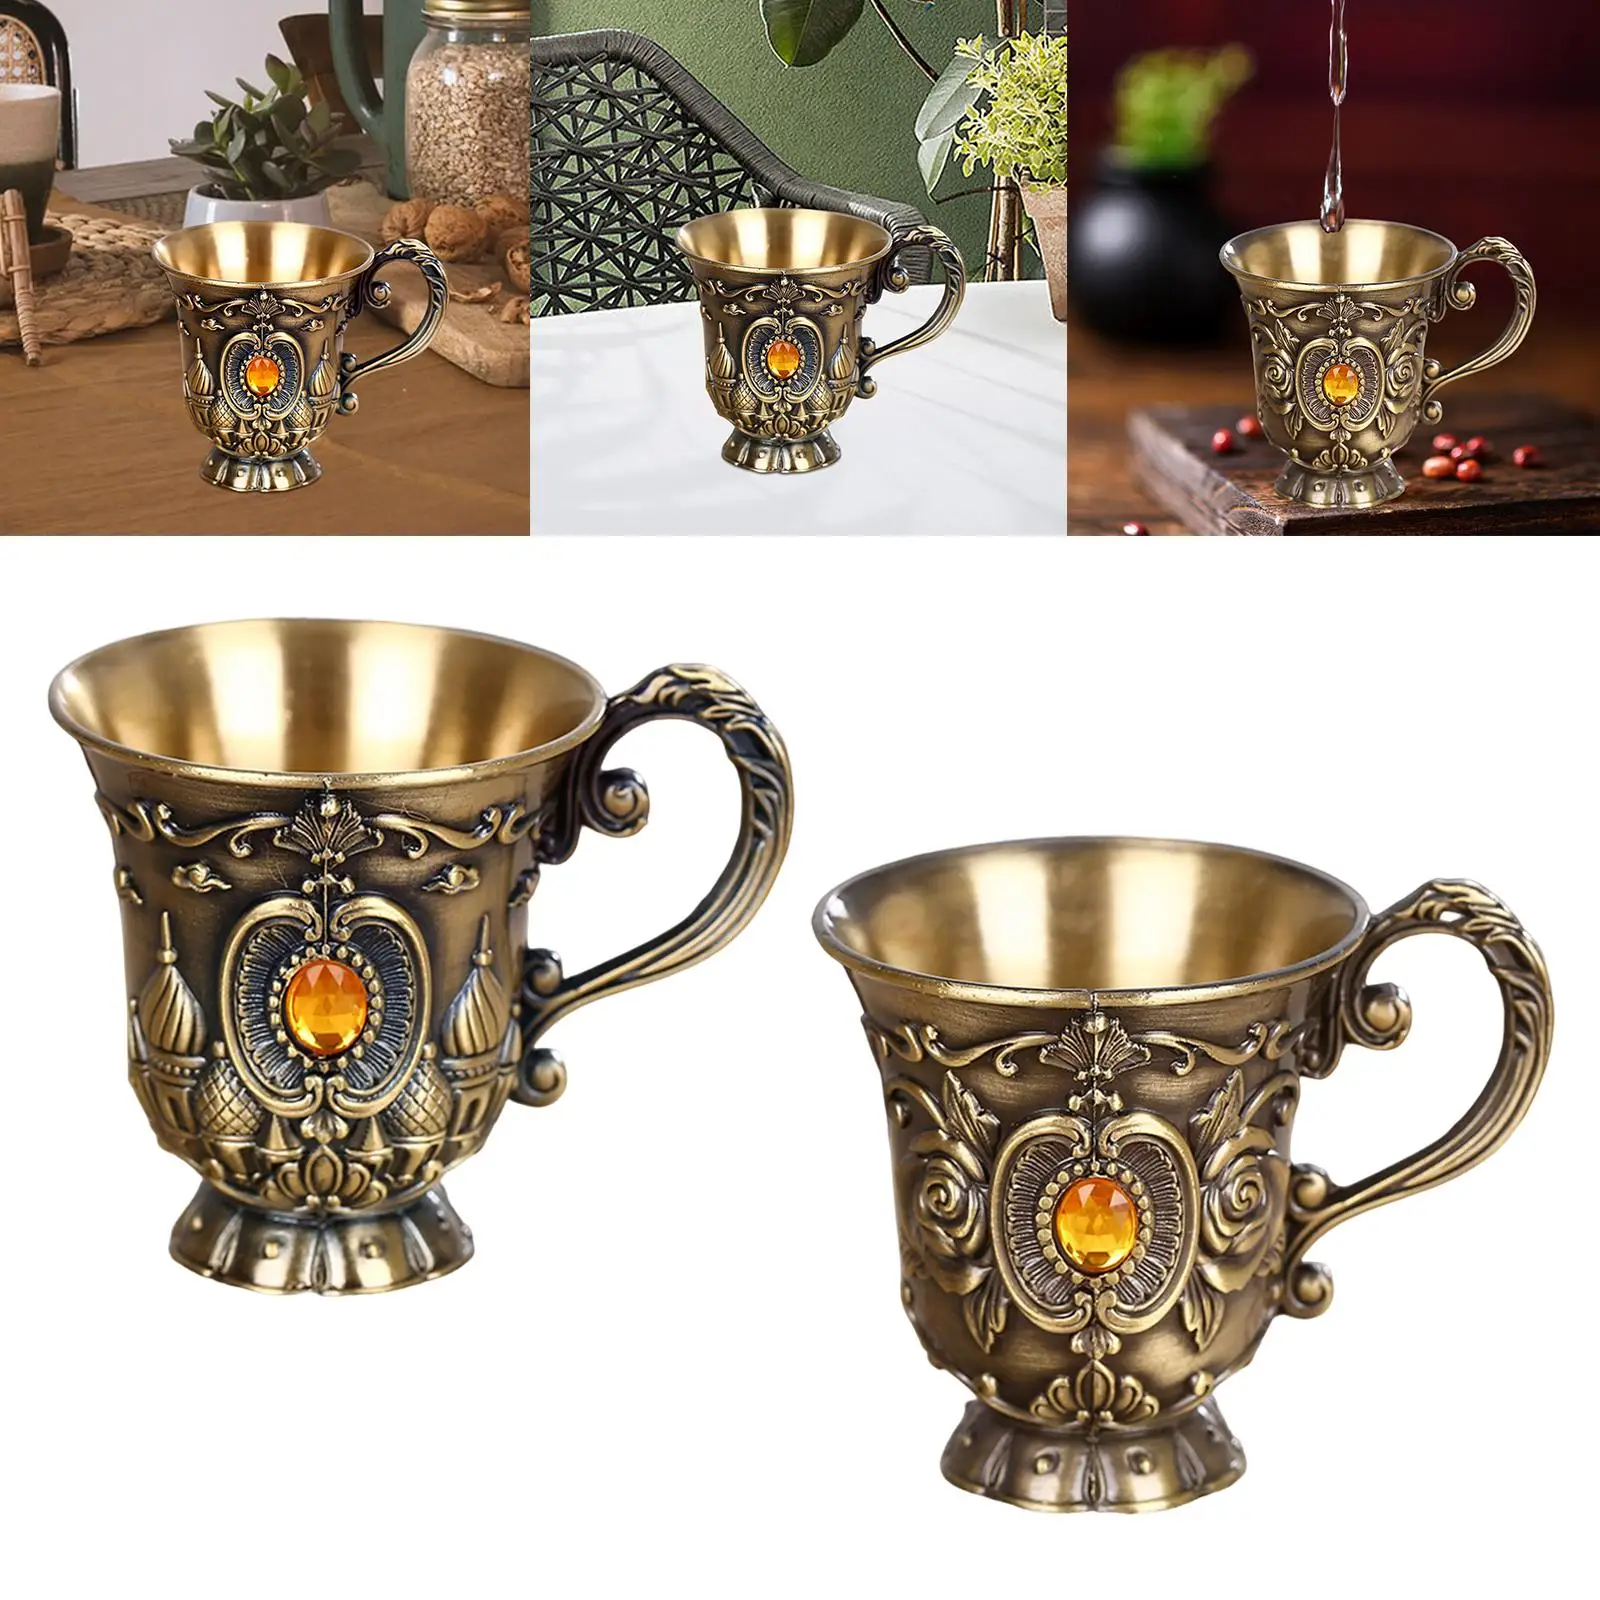 Zinc Alloy Drinking Cup Embossed Practical Portable Decoration Gifts Retro Teacups for Living Room Hotel Home Holiday Side Table